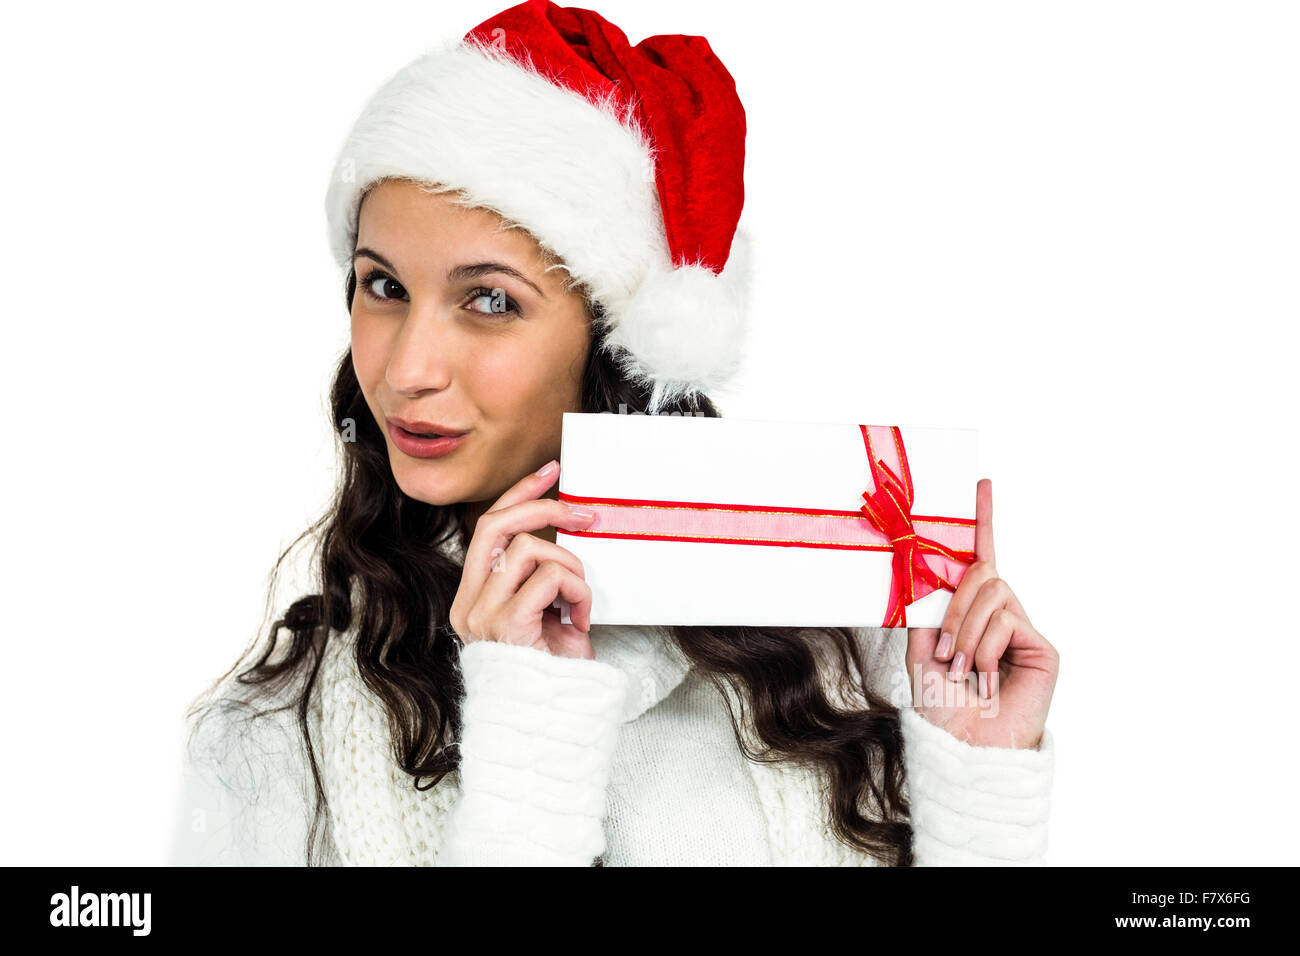 Attractive woman holding gift box Stock Photo